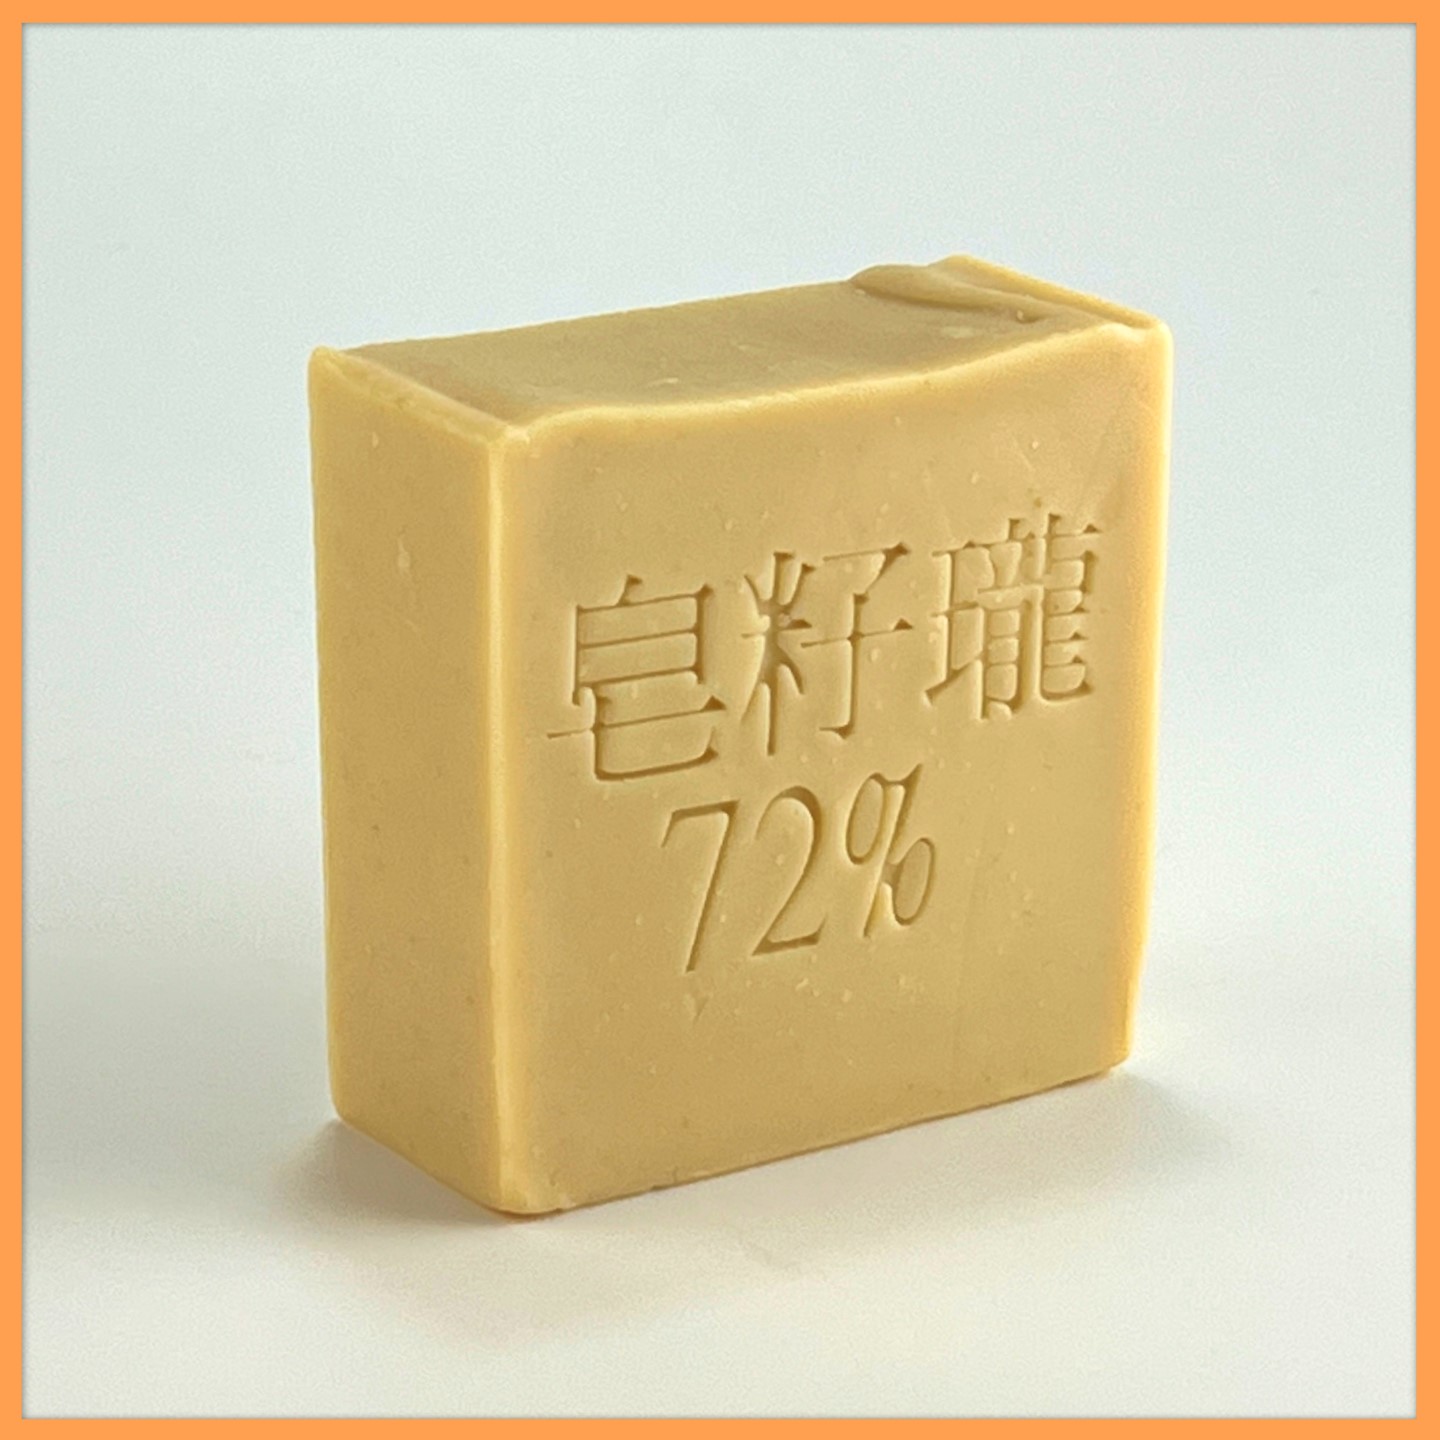 Ginger Extract Soap